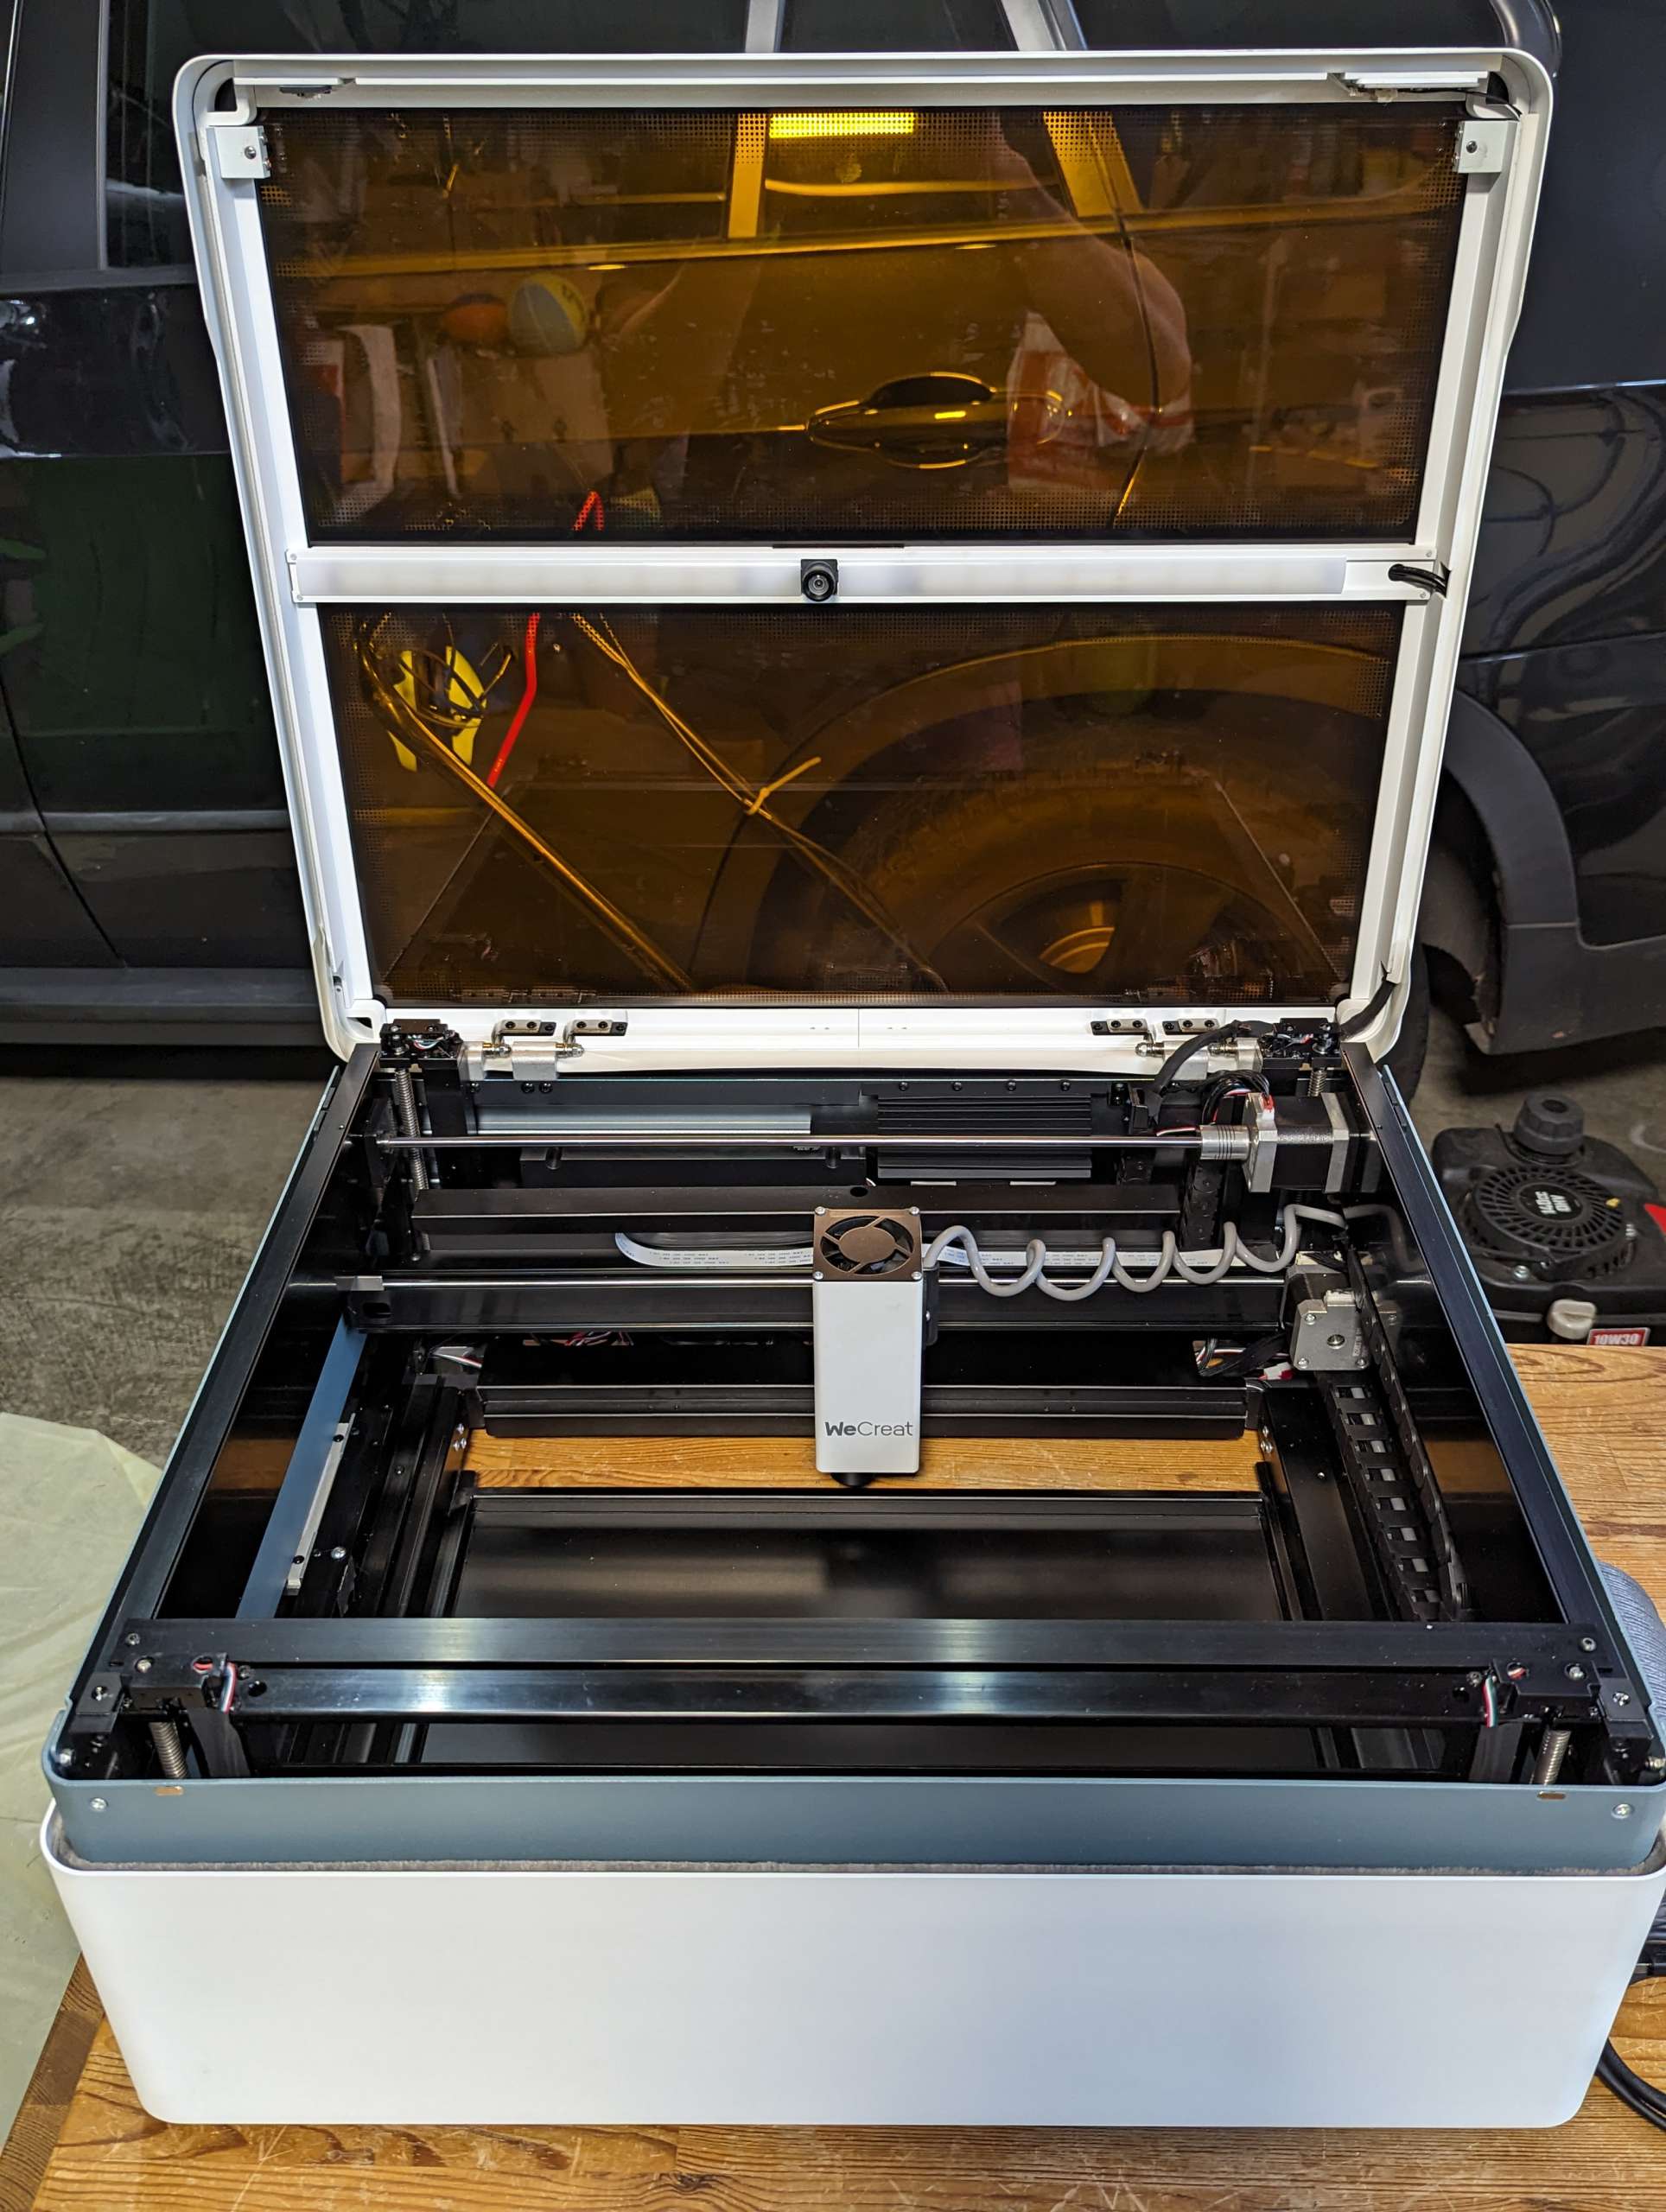 Engrave Tumbles the EASY WAY!! With the WeCreat Vision 20W Diode Laser  Engraver 